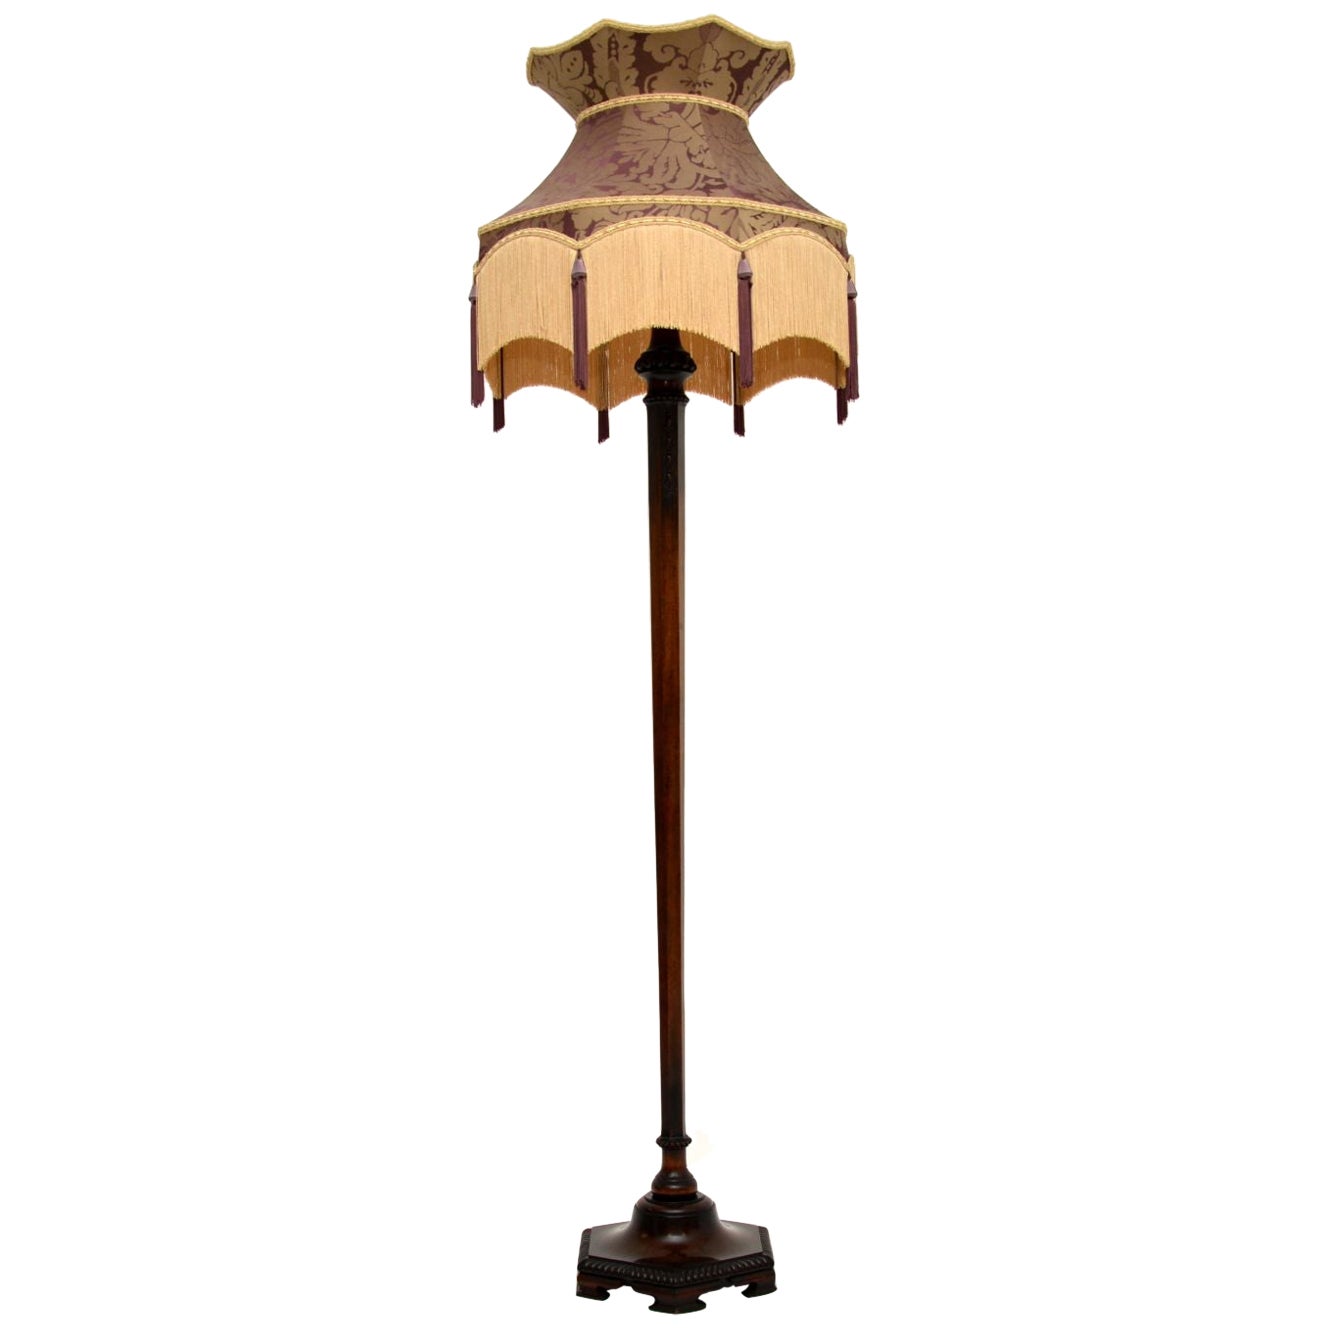 Antique Floor Lamp with Silk Shade